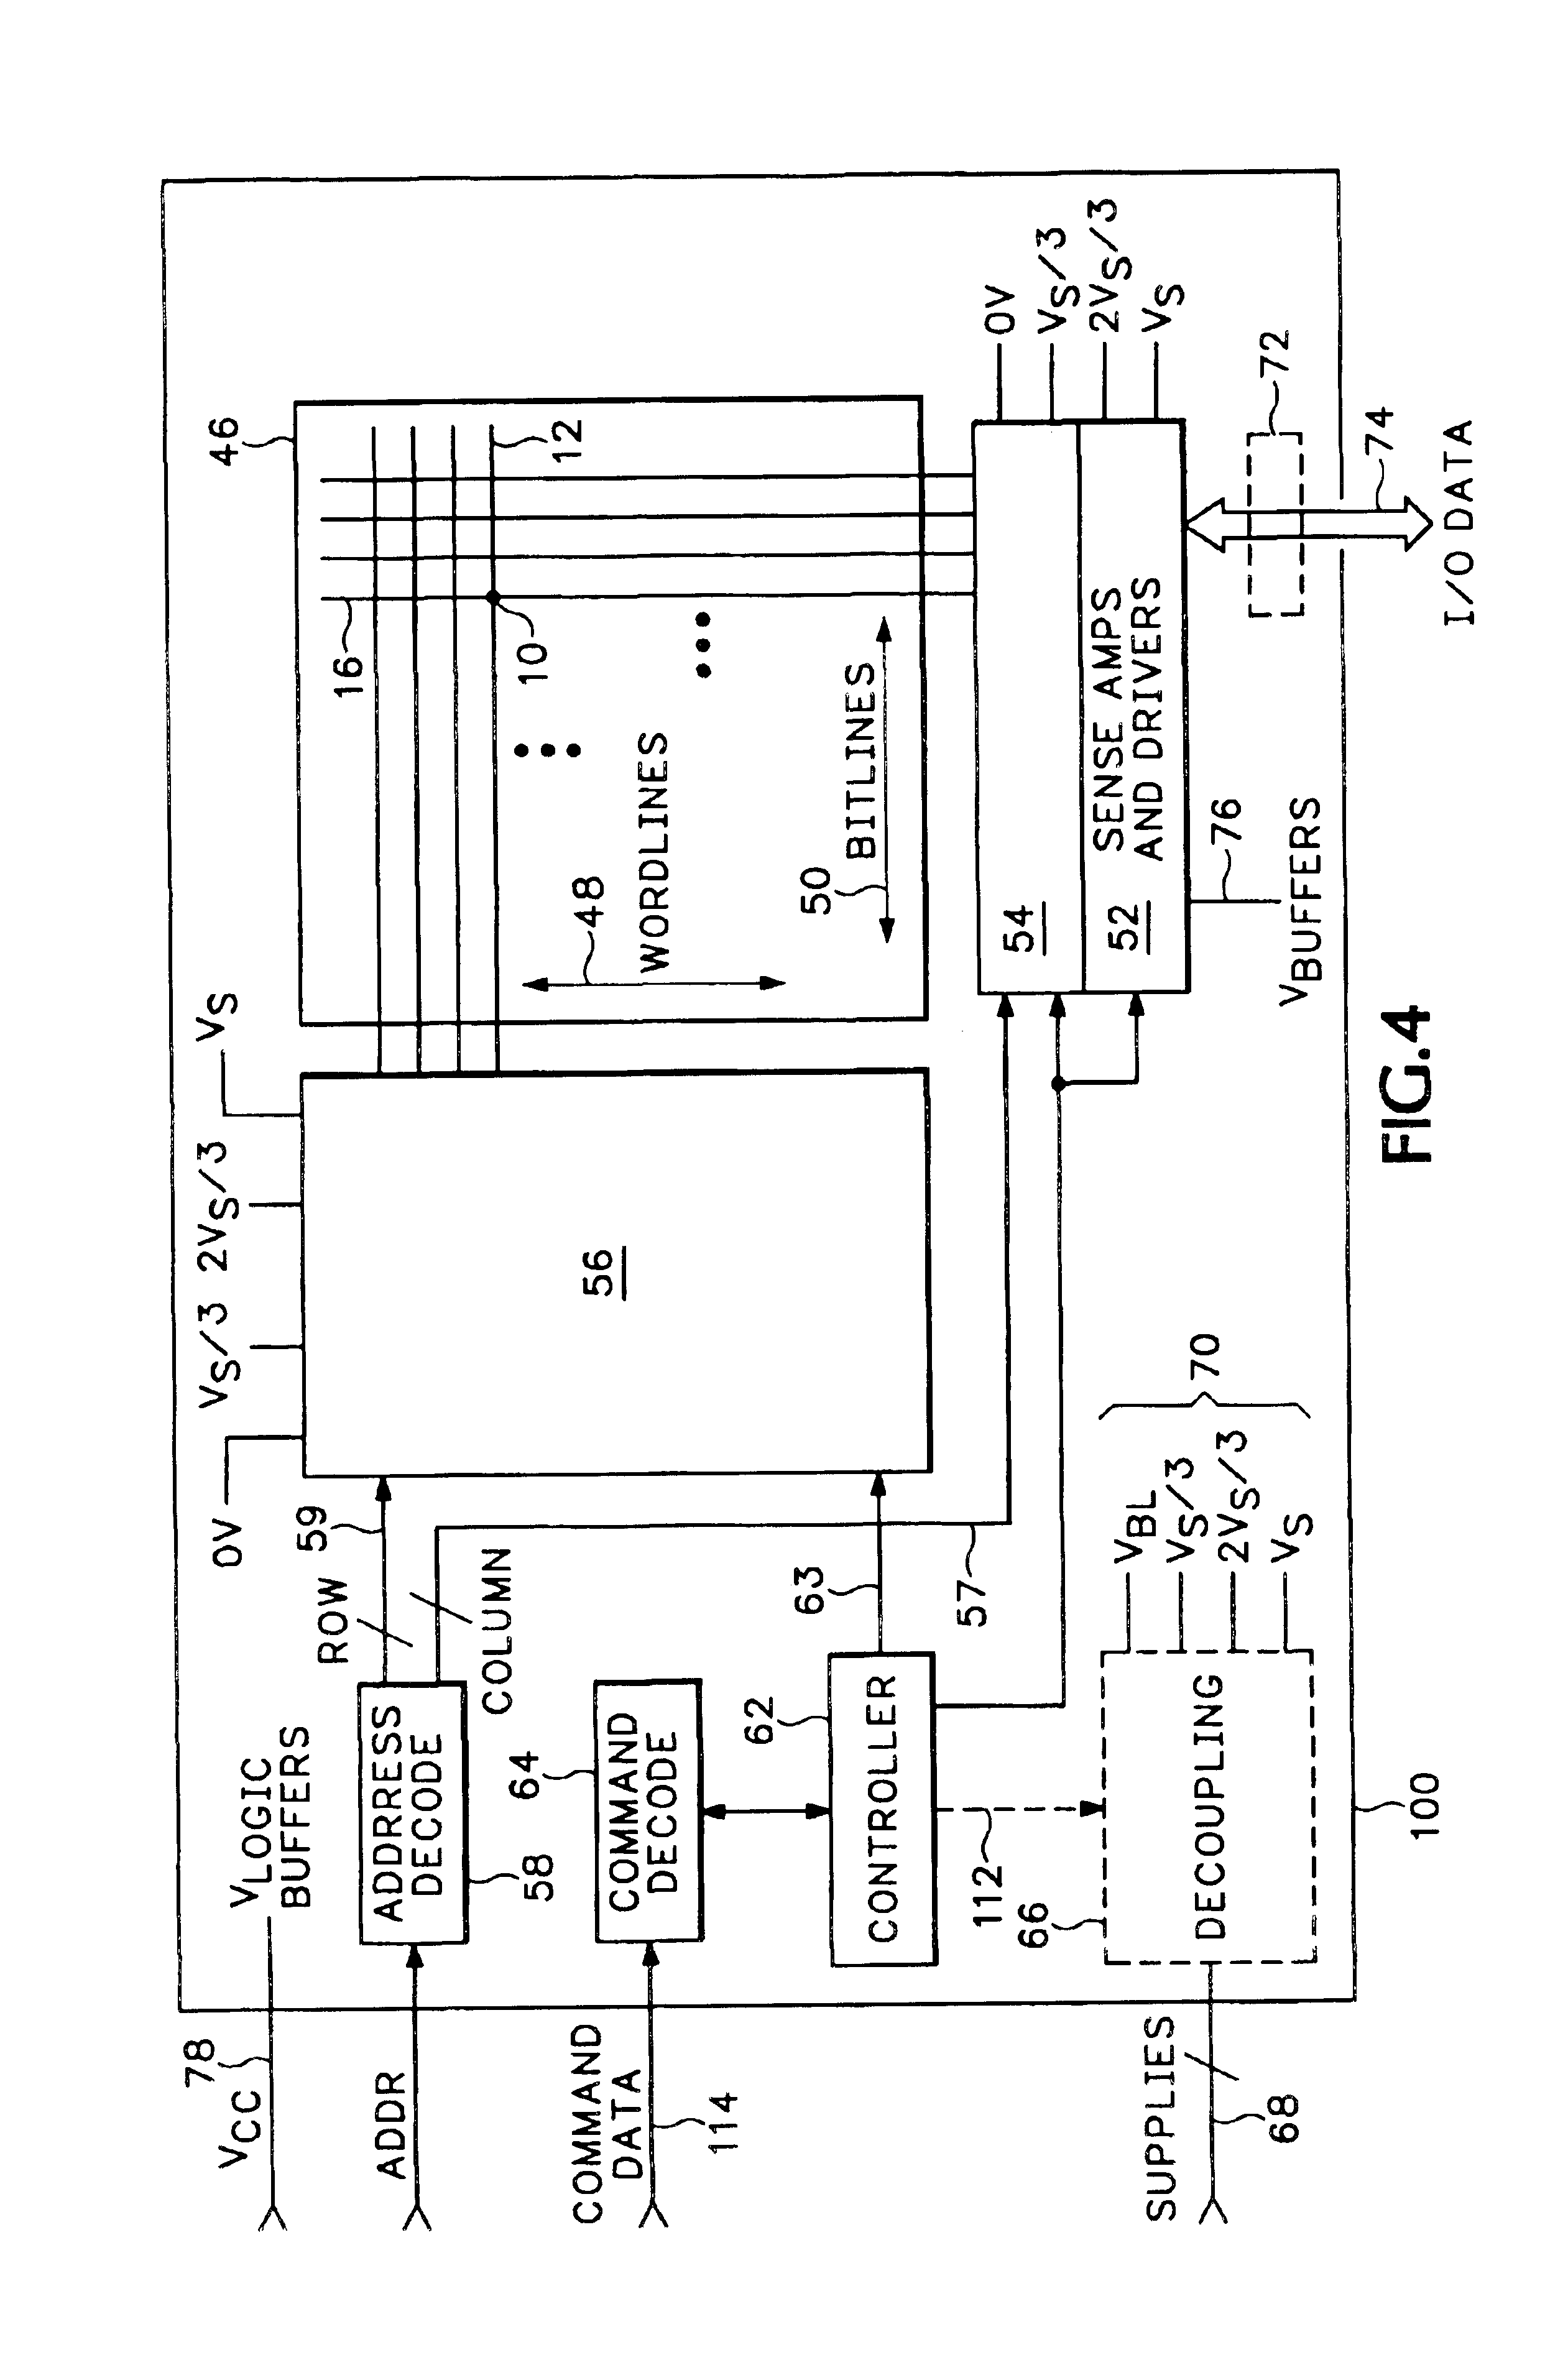 Memory device, circuits and methods for operating a memory device